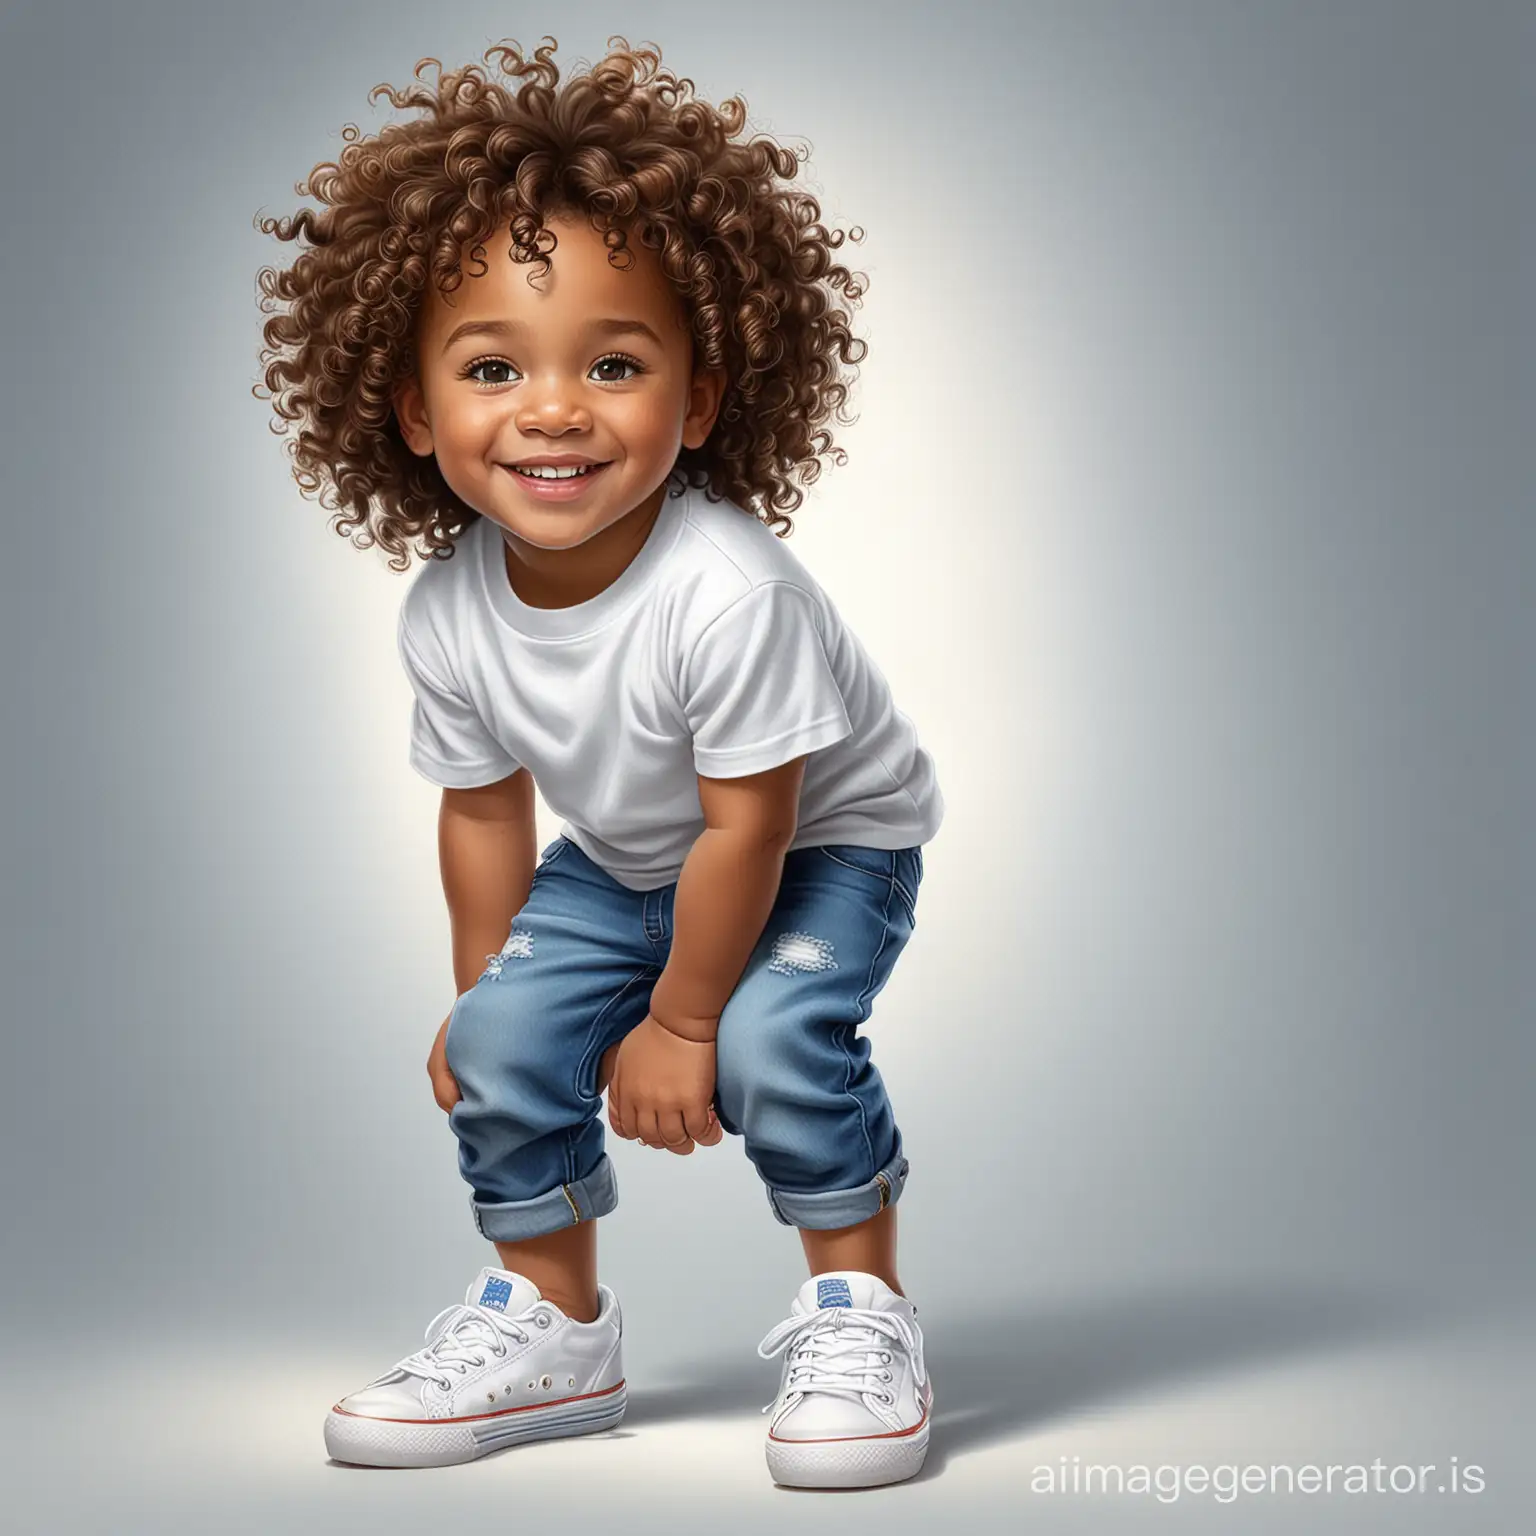 AfricanAmerican-Toddler-with-Curly-Hair-and-Dimples-in-Casual-Outfit